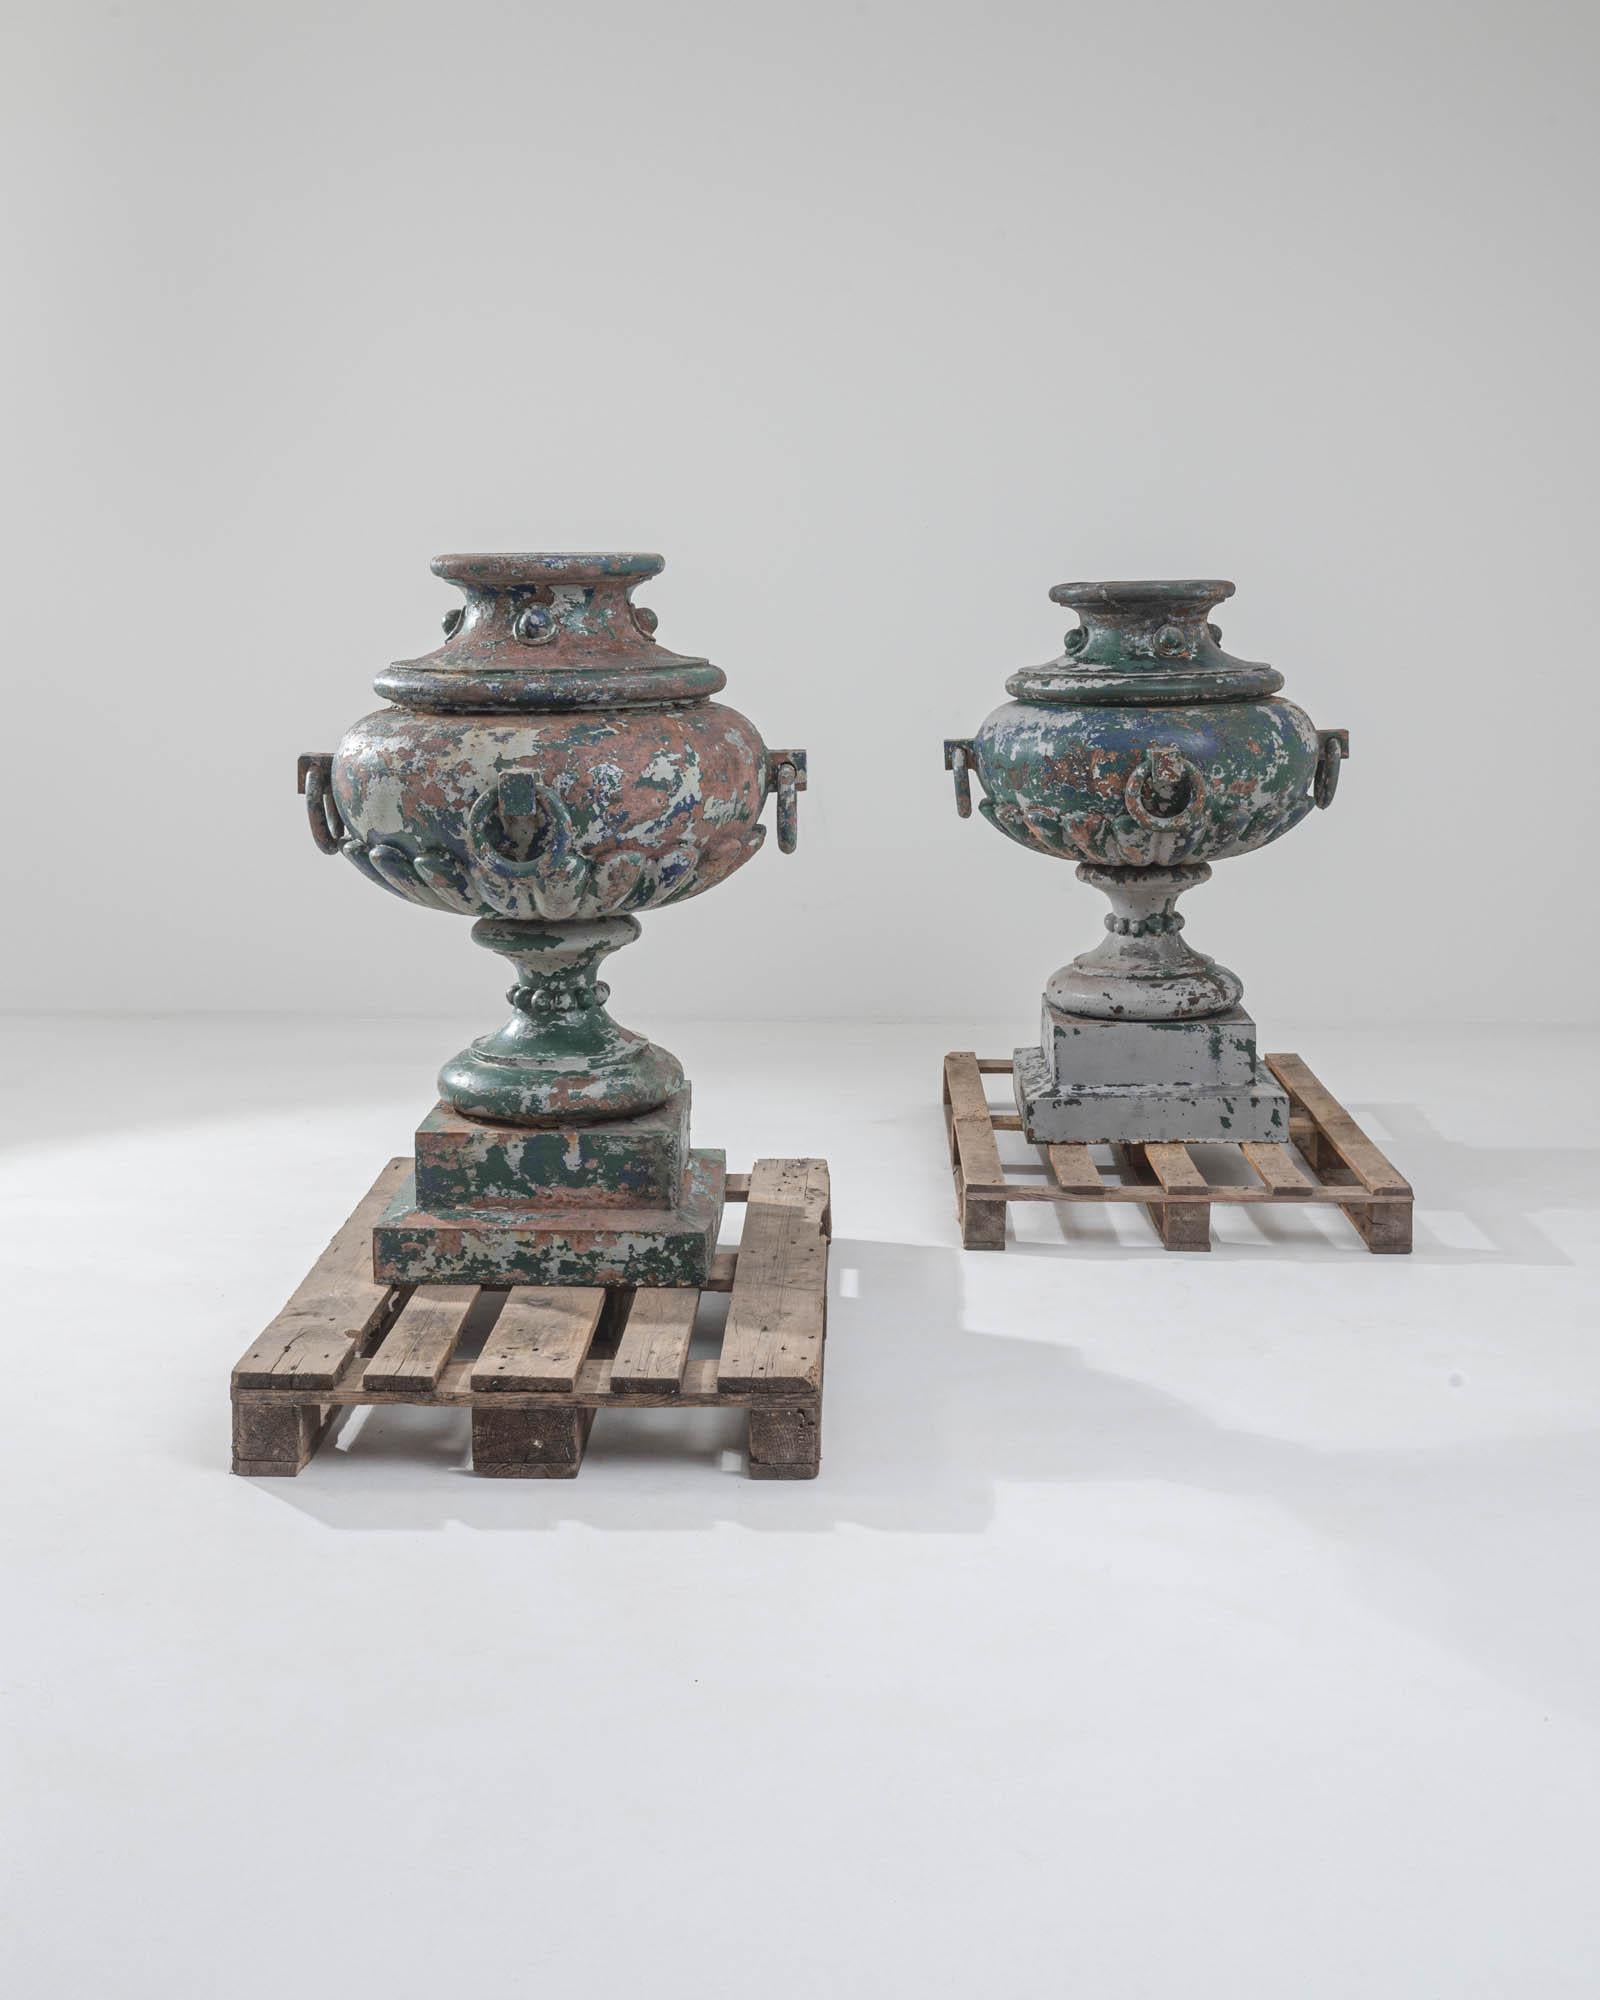 This rare pair of antique cast iron vessels combine a distinctive patina with a striking silhouette. Made in France in the 1800s, these pieces were likely used as planters or garden accents. The ornamental form plays astutely with volume: a slender